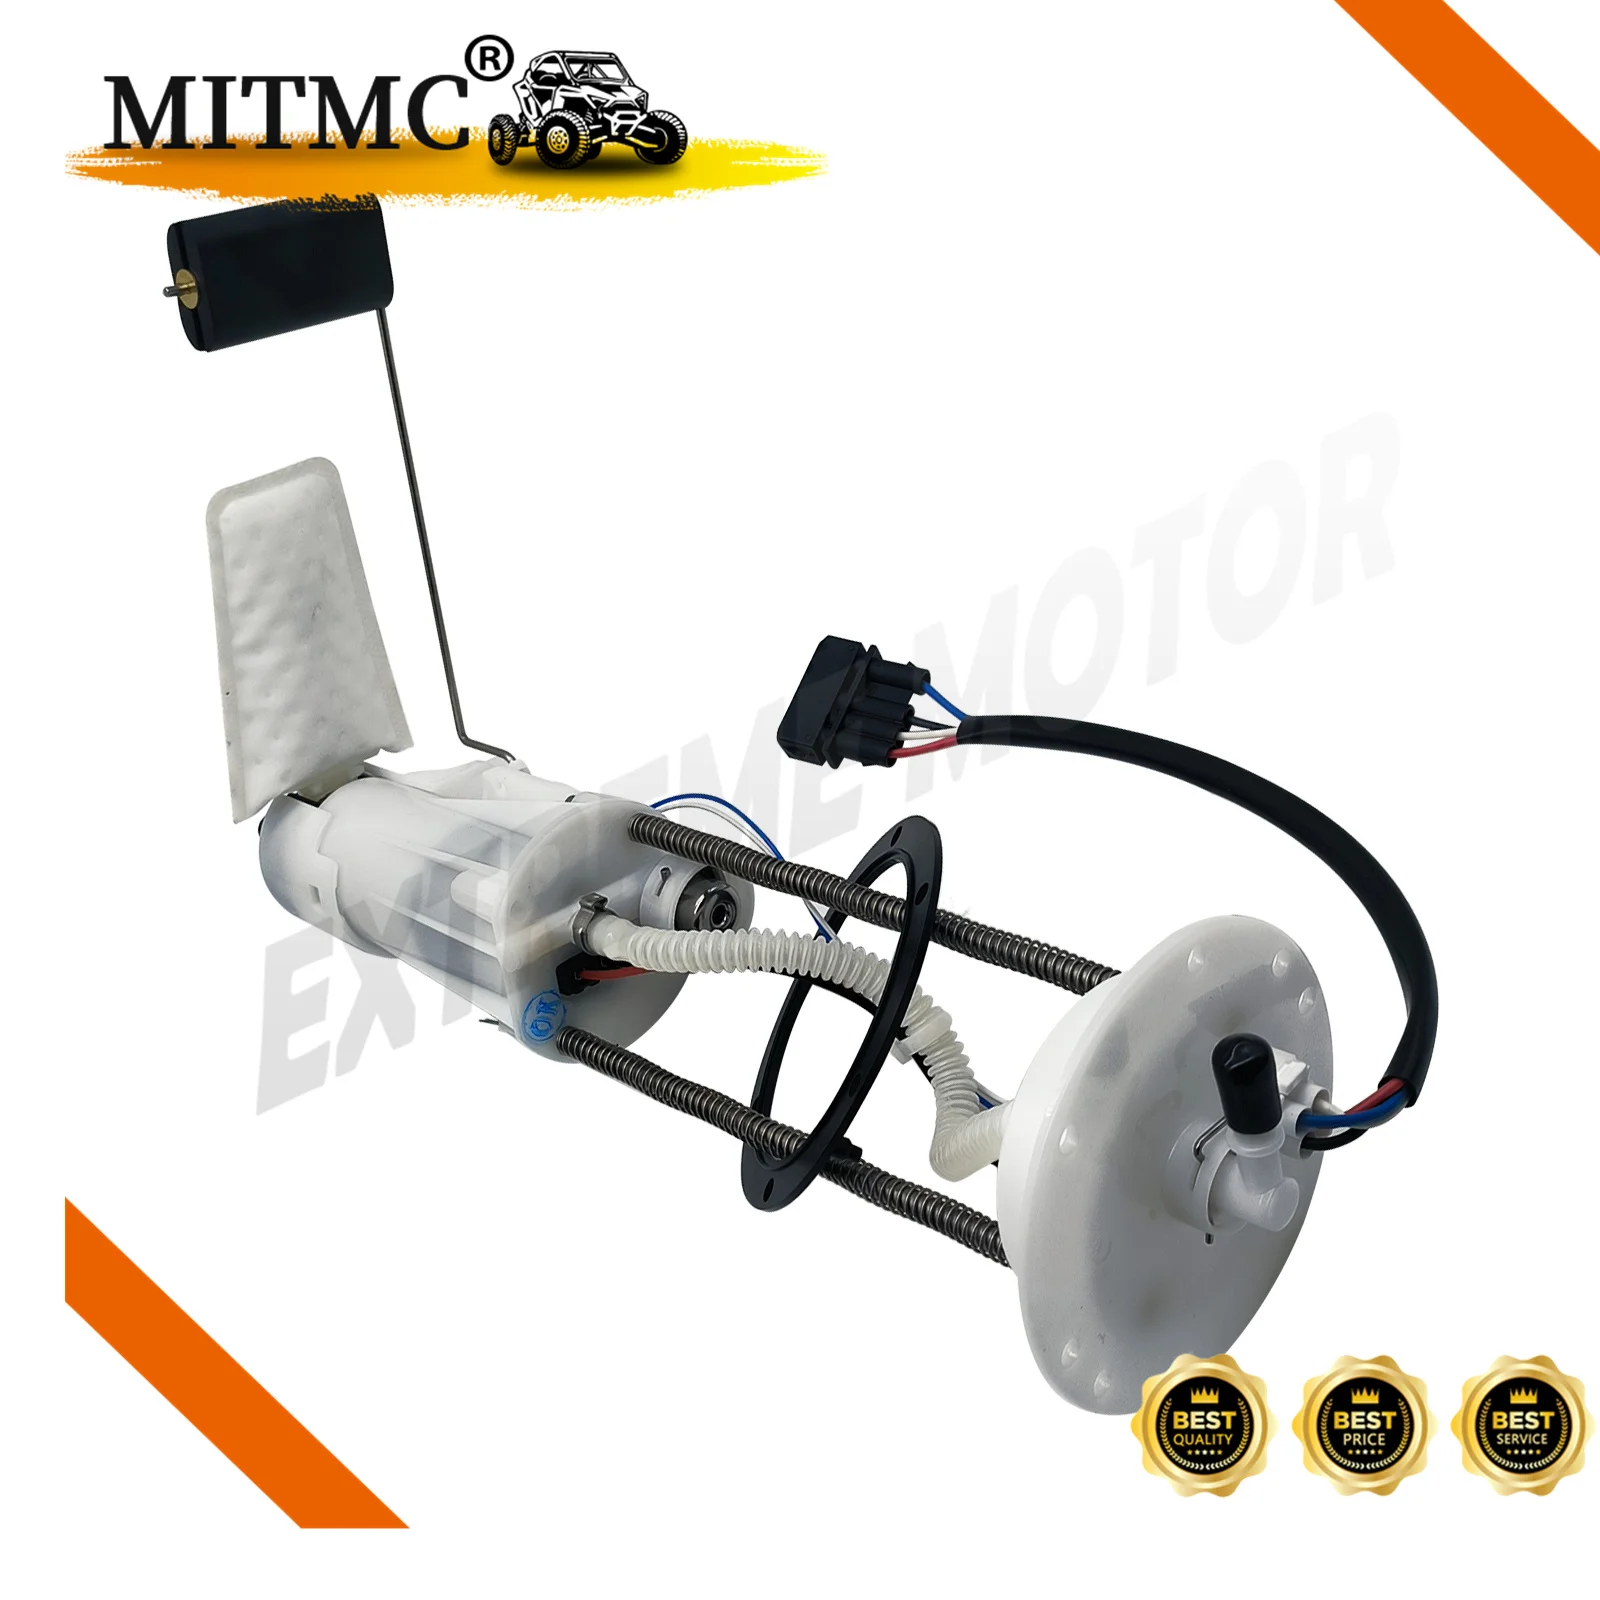 Fuel Pump Module Electronic Fuel Injection For ODES V-Twin 800 UTV ATV Dominator Raider Assail RM 0124508ant EFI 10904080001 5pcs new 40049 hqfp64 car computer fuel injection drive module chip ic for ecu